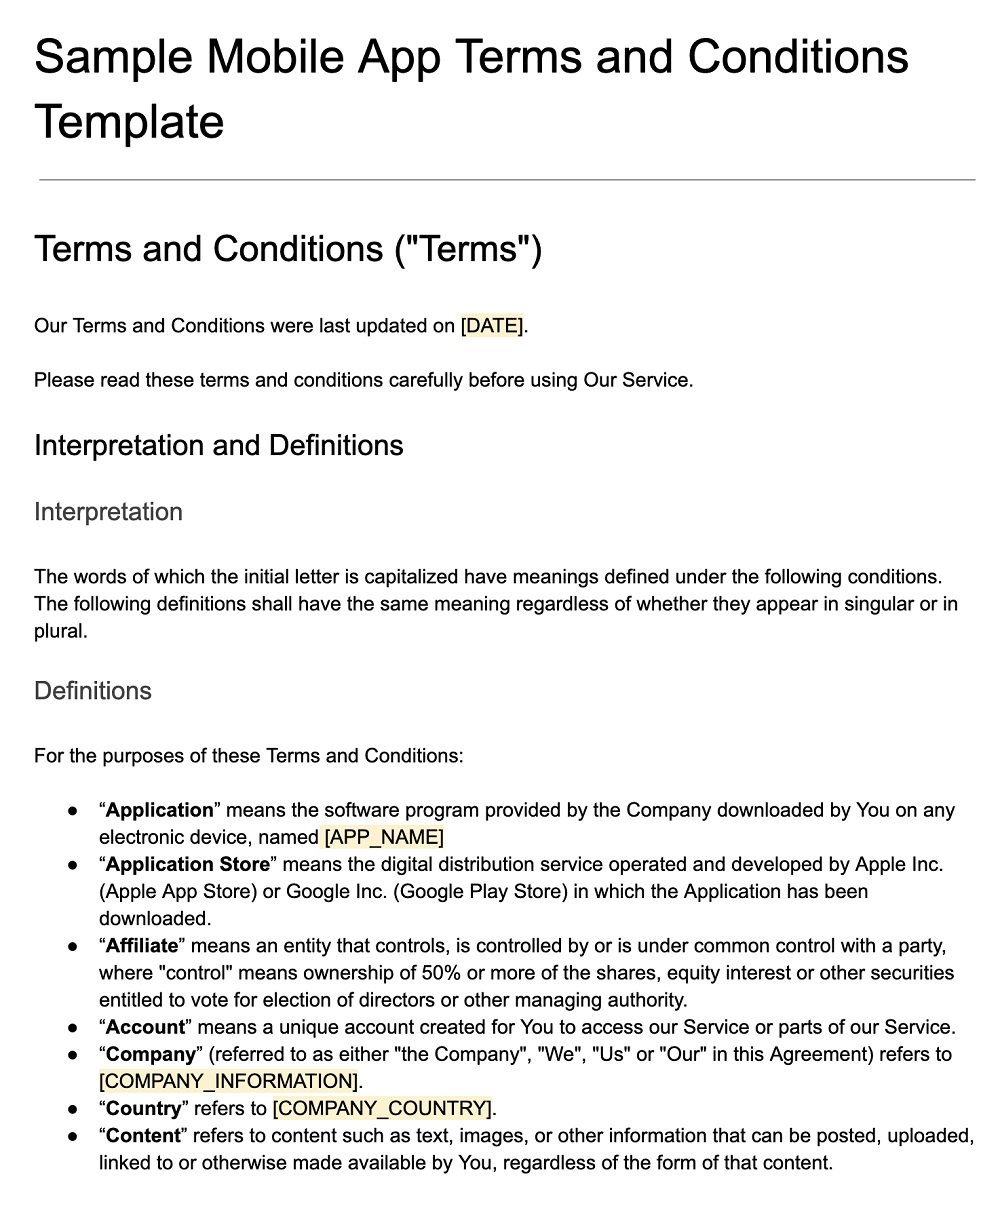 Screenshot of the Sample Mobile App Terms and Conditions Template